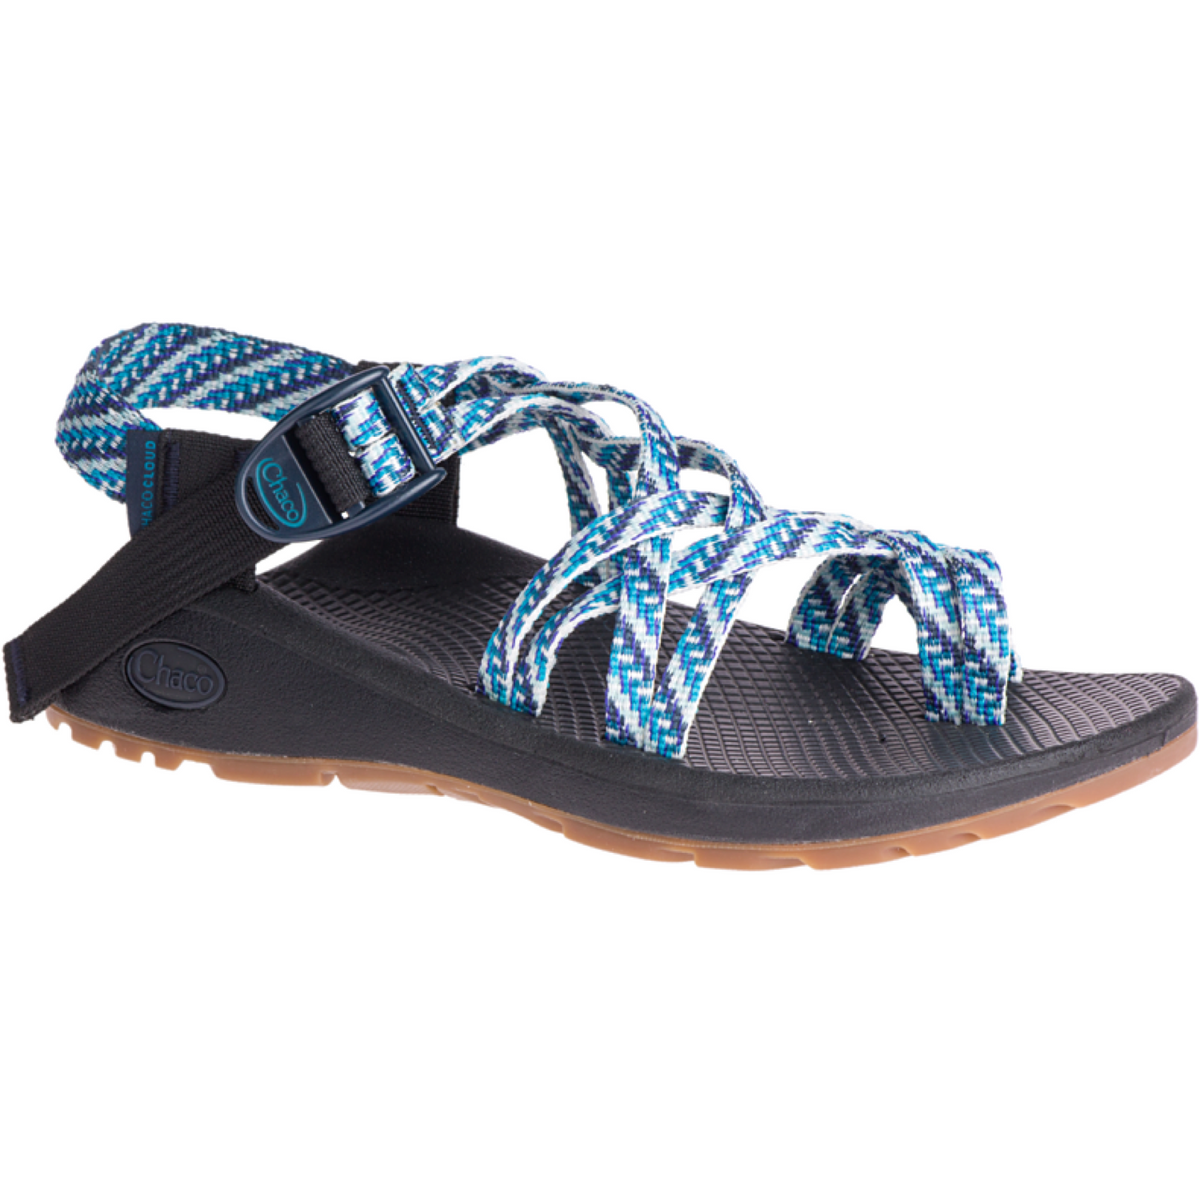 Z/Cloud X2 | Chacos Sandals | Playmakers